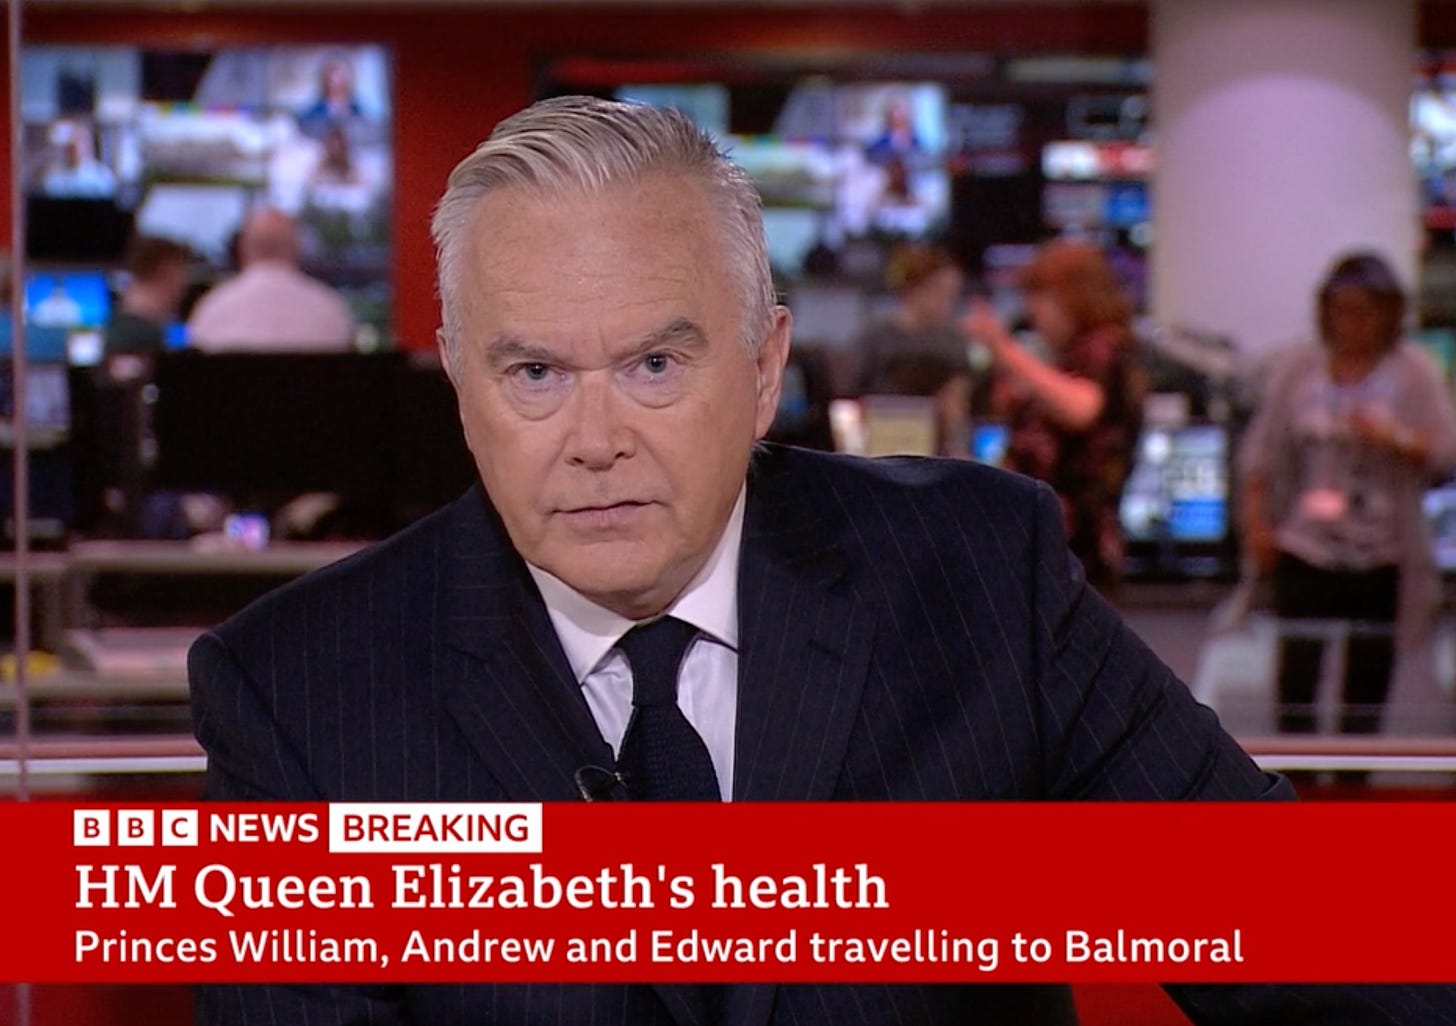 A news presenter in a black suit and tie.